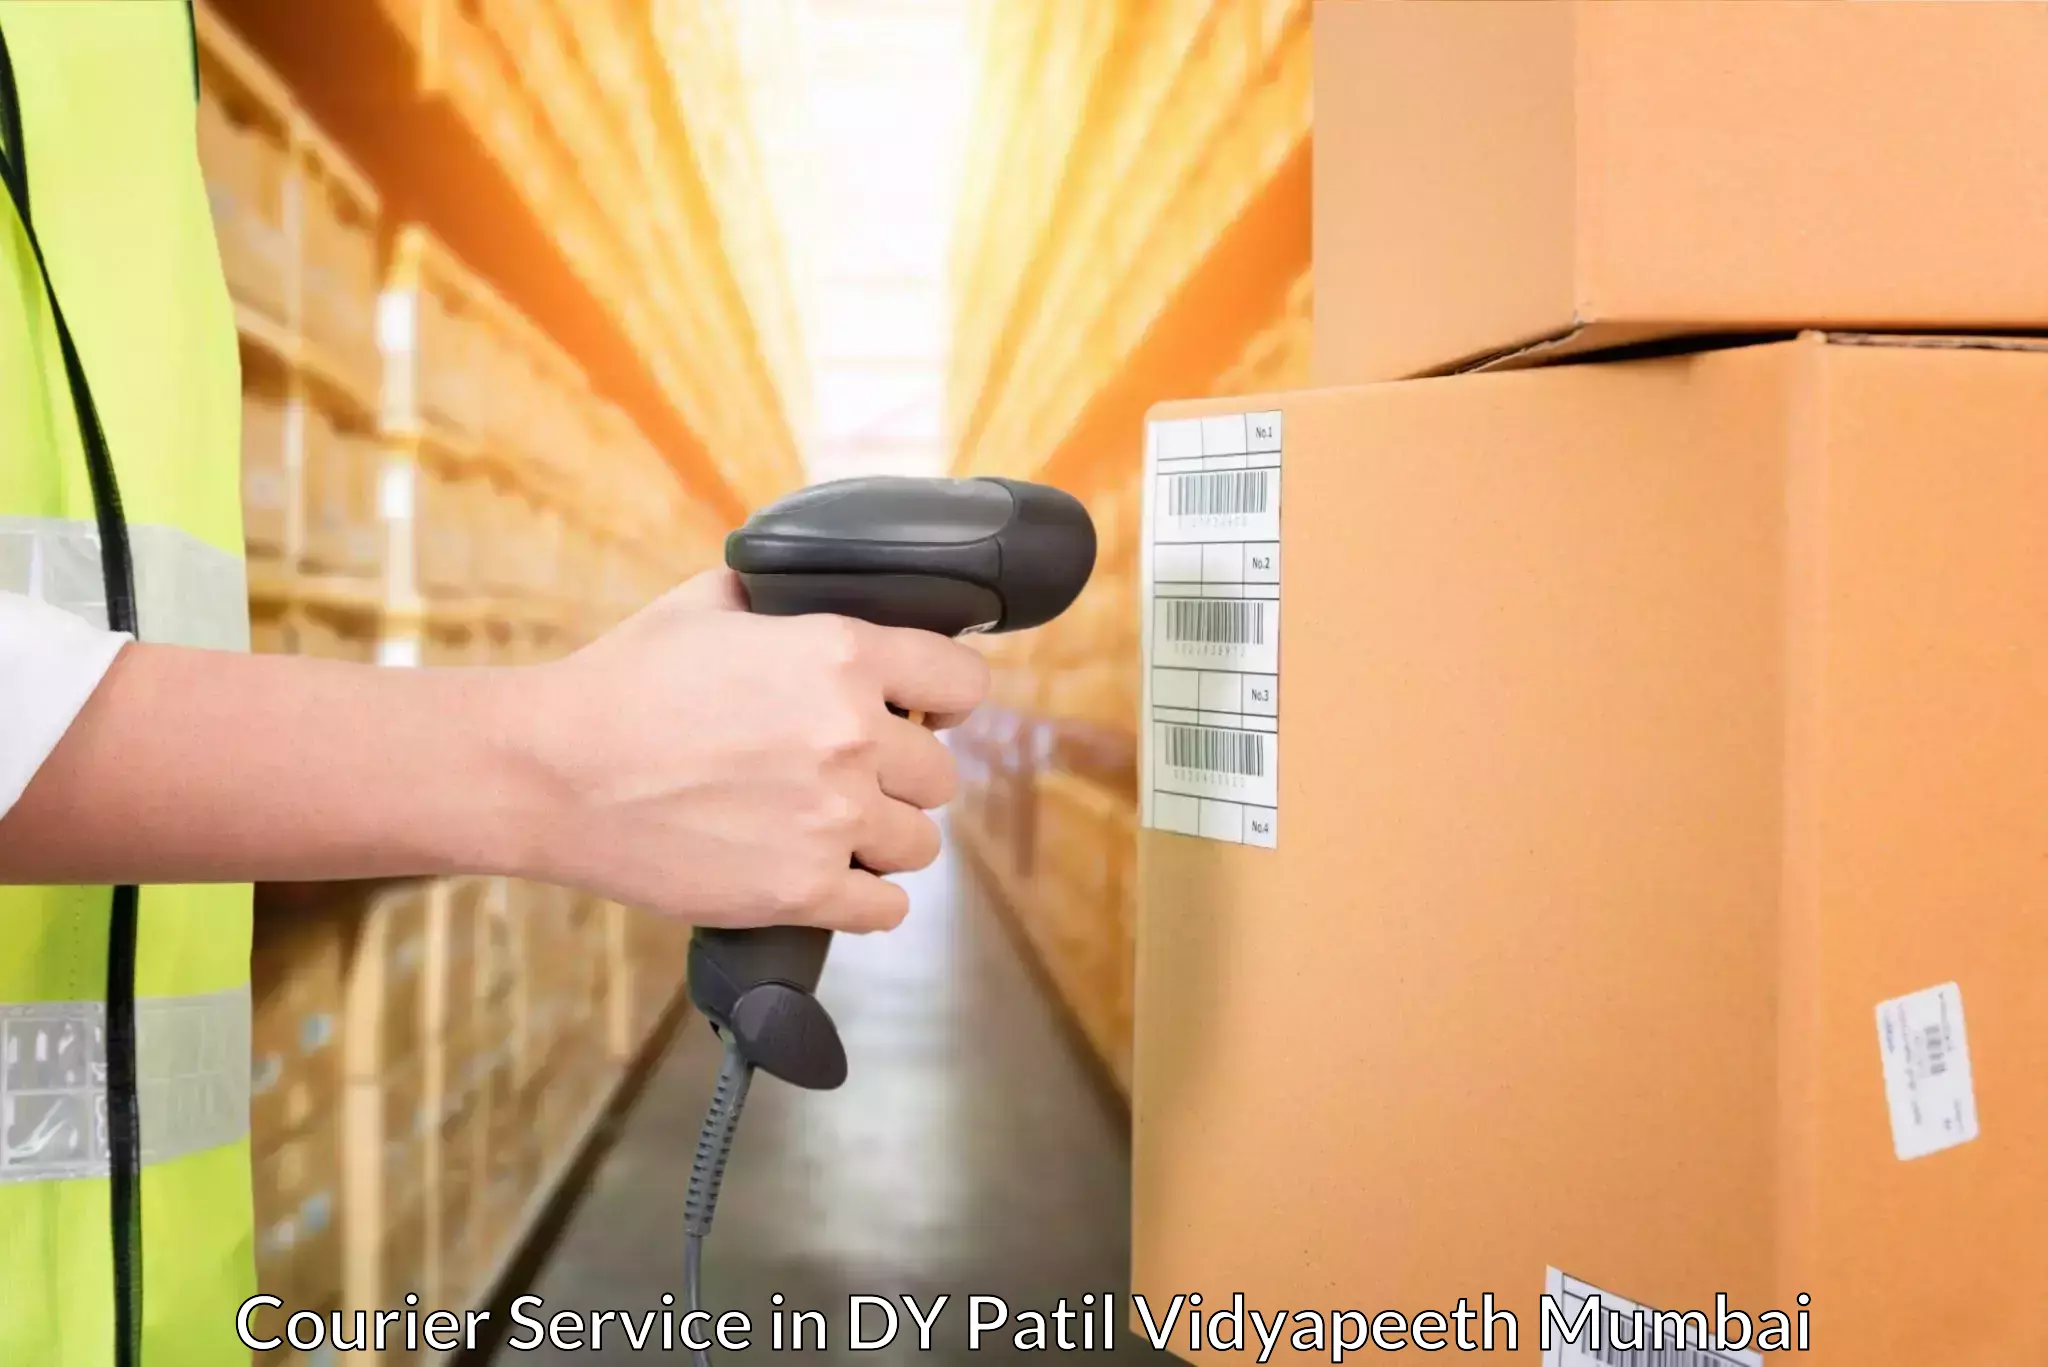 High value parcel delivery in DY Patil Vidyapeeth Mumbai